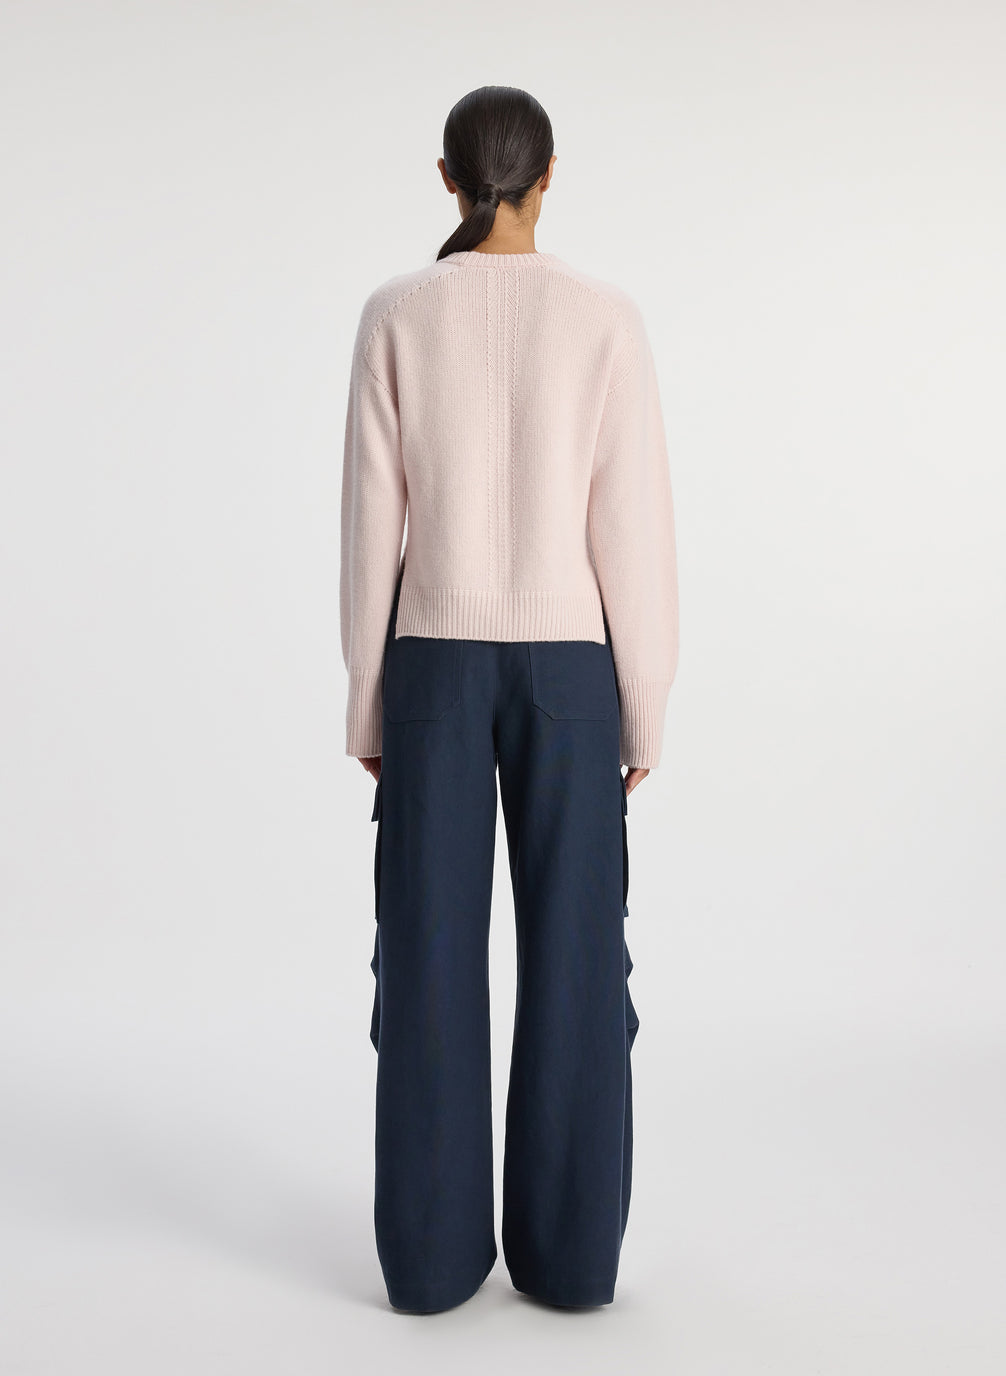 back view of woman wearing pink sweater and navy blue satin cargo pants